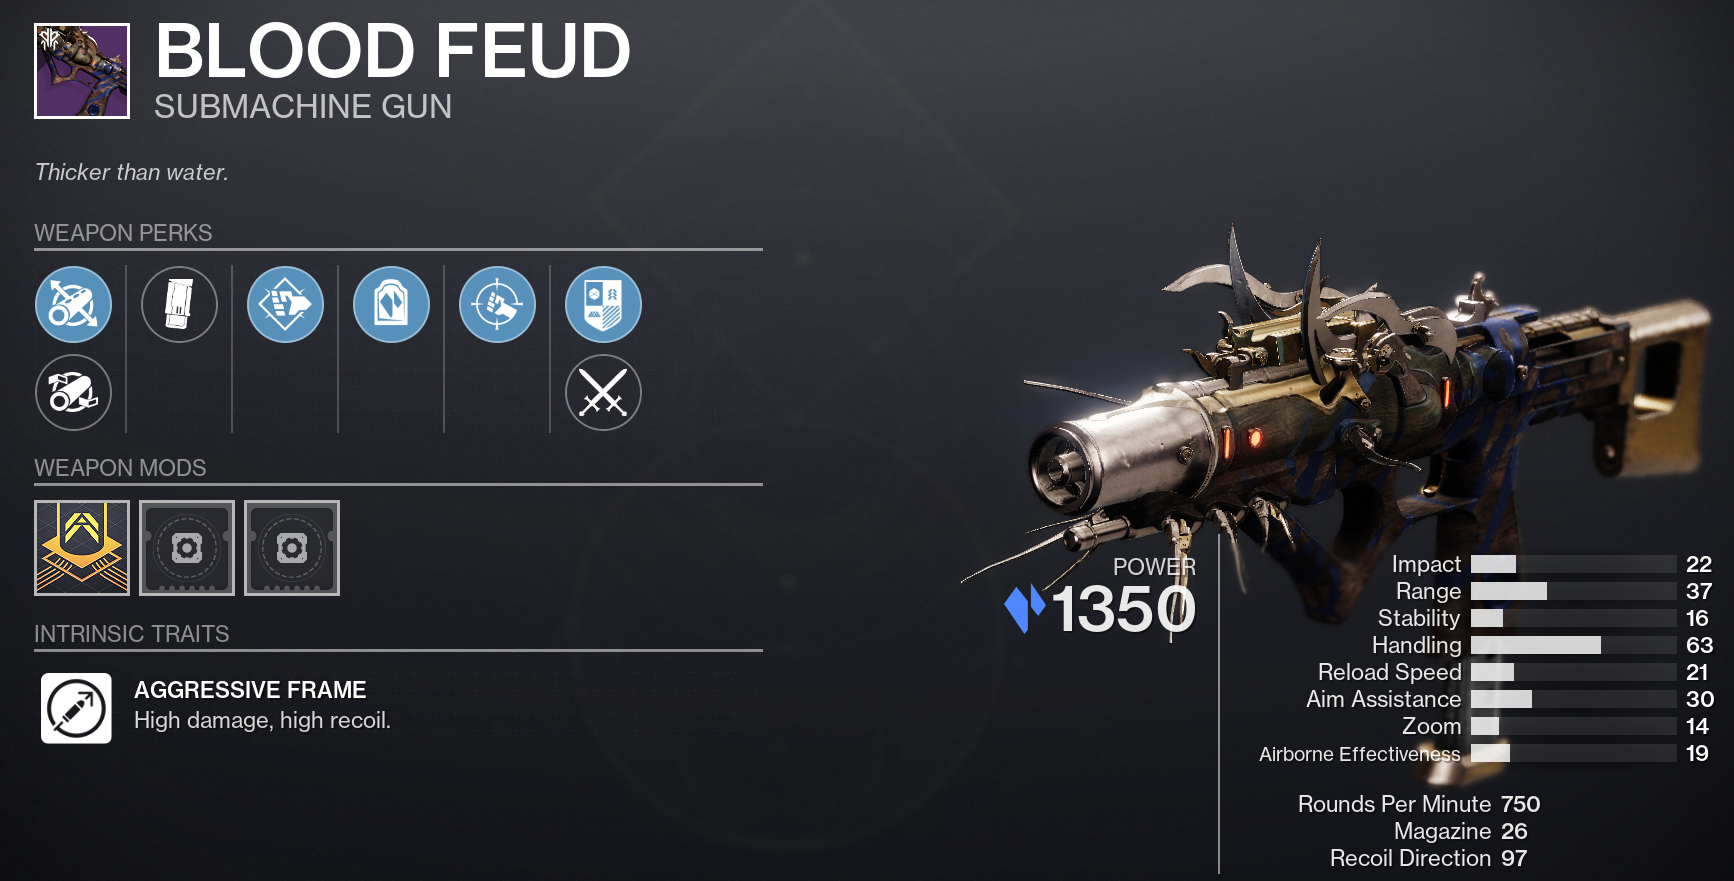 How to get Blood Feud in Destiny 2 - Blood Feud God Rolls for PvE and PvP